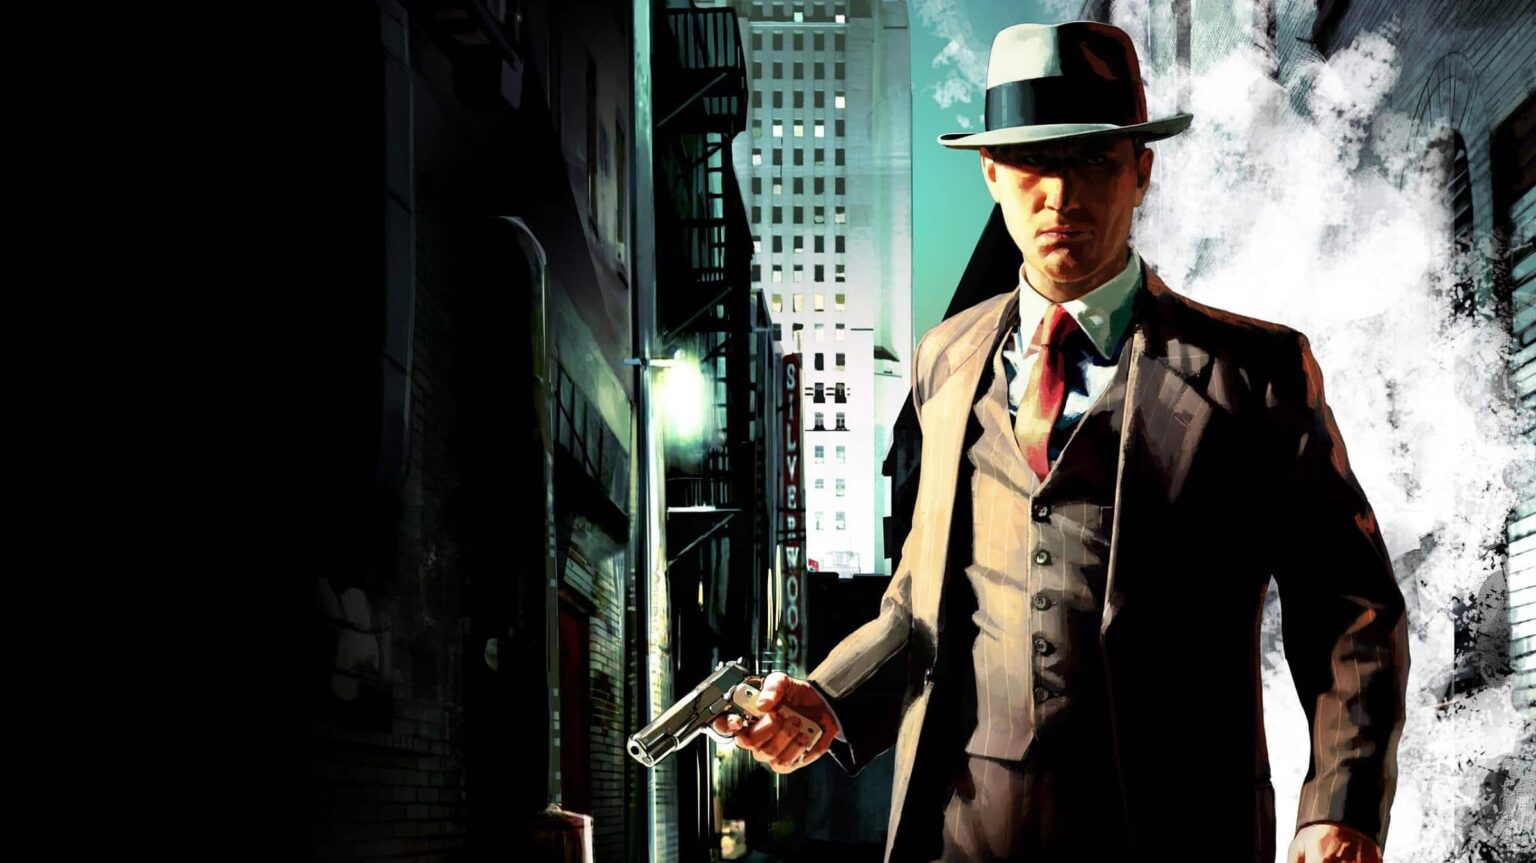 We've been waiting for 'L.A. Noire 2' for ten years already. Any chance Rockstar will surprise us with a sequel this year? Follow the potential clues!